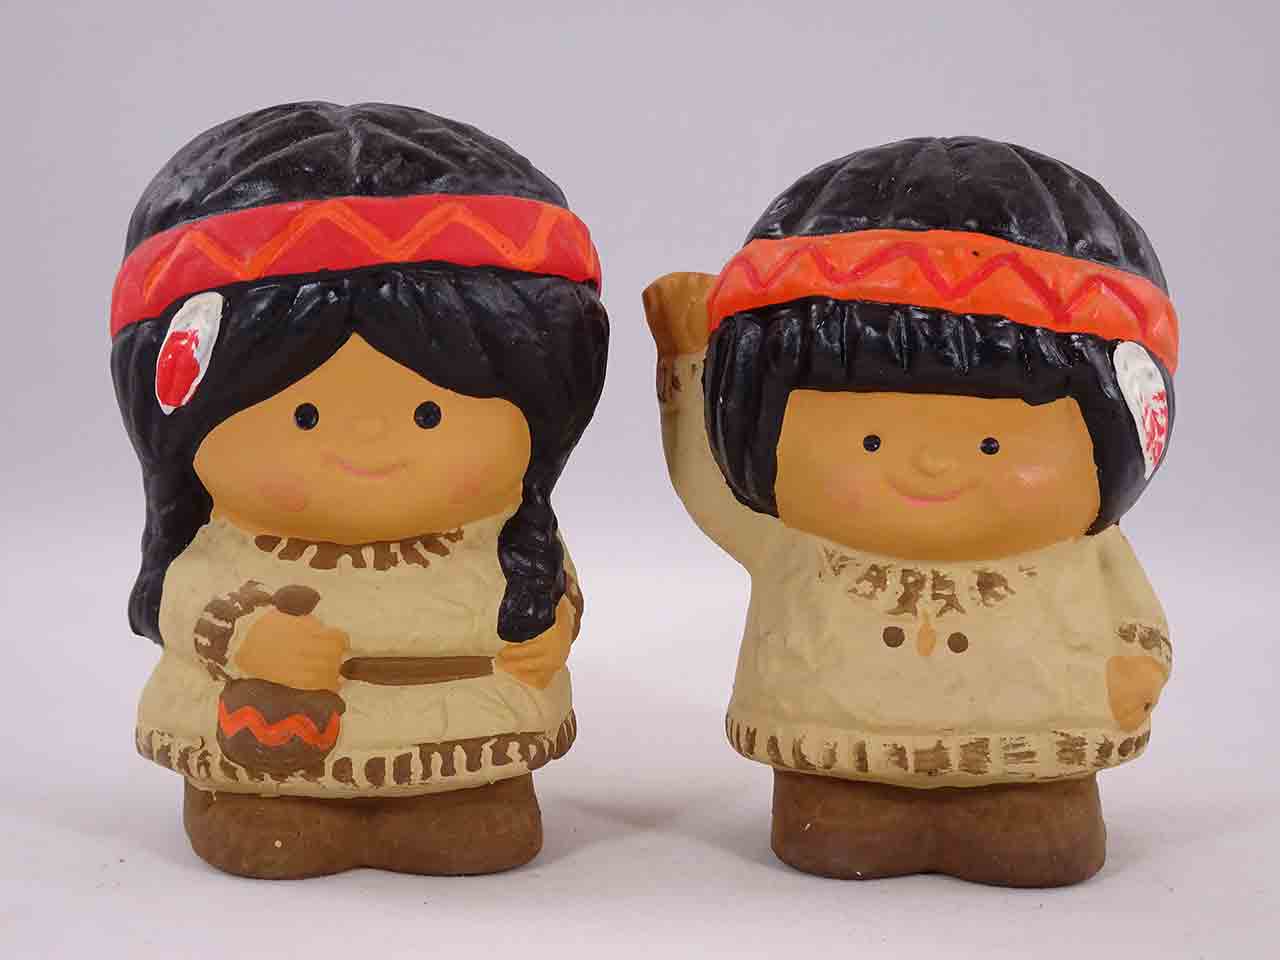 Gibson Greeting Cards Salt and Pepper Friends - Native American salt and pepper shakers